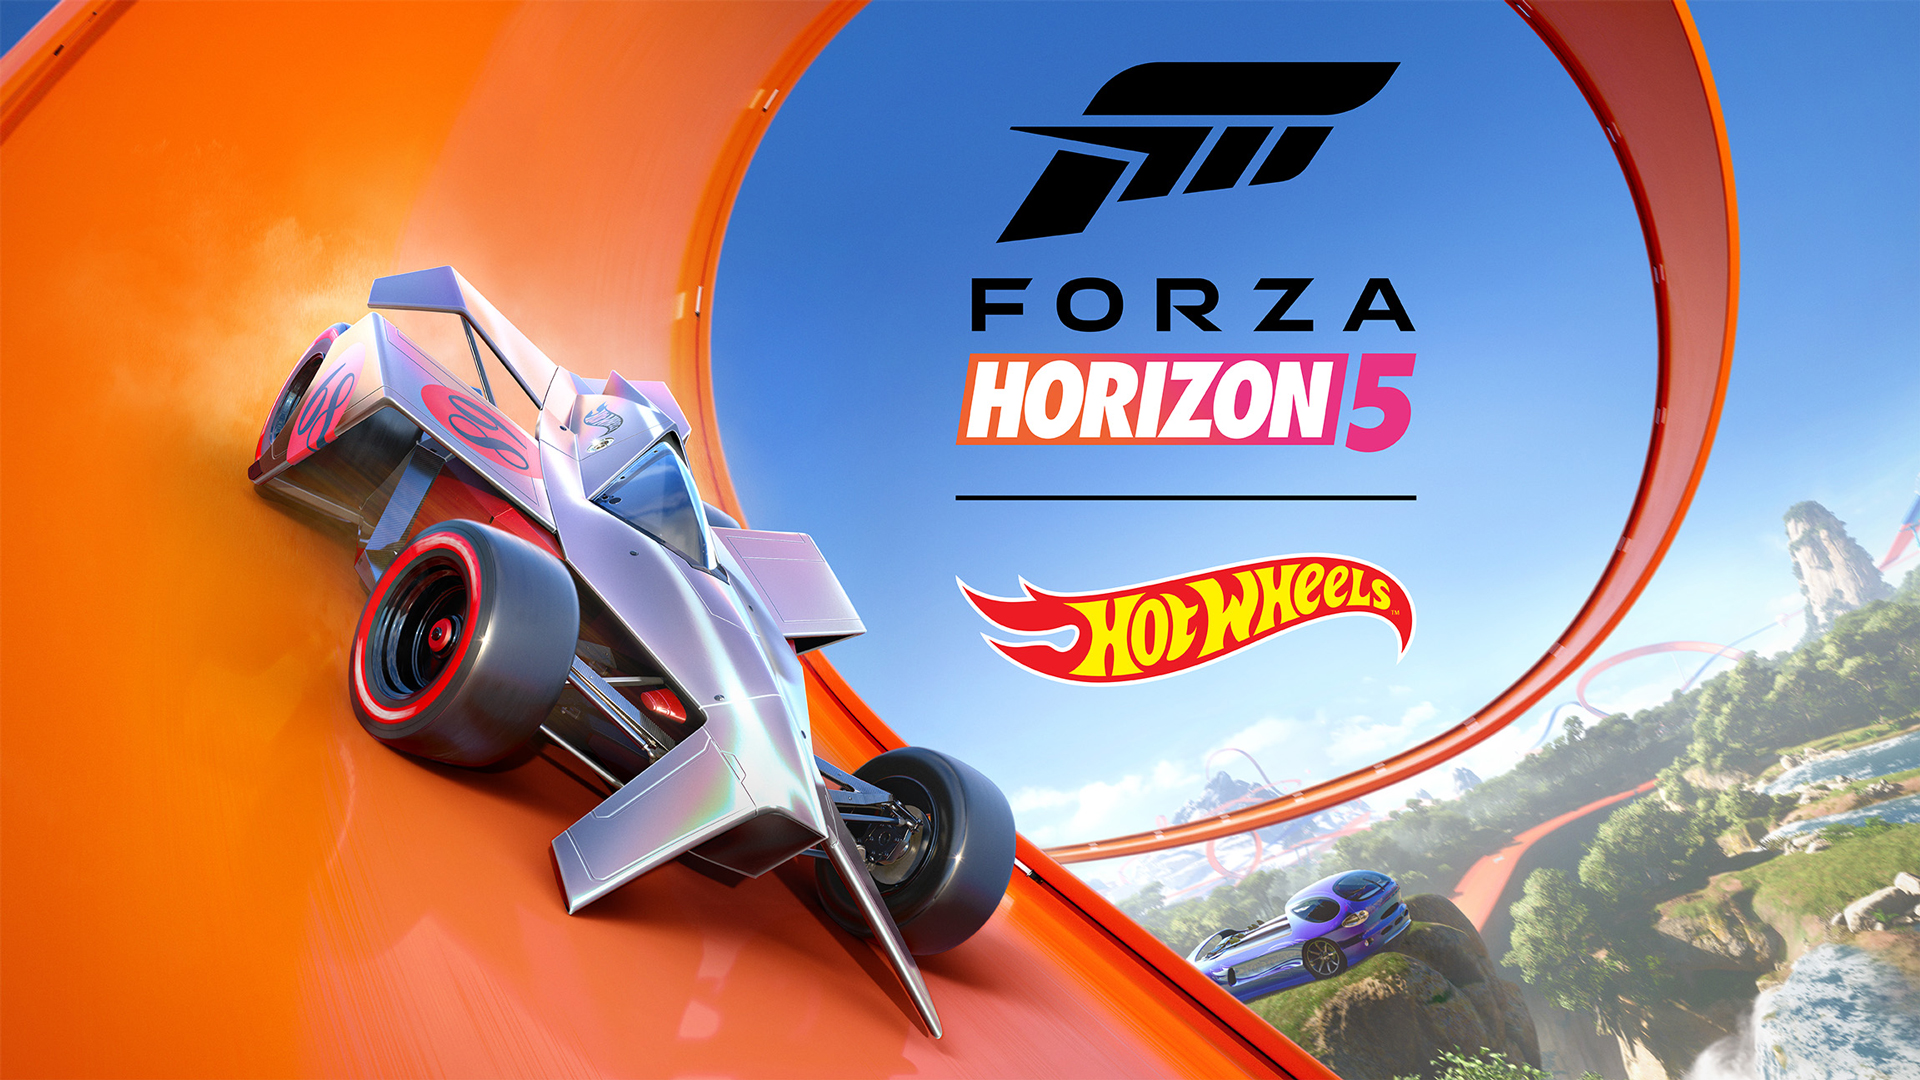 Forza Horizon 5 Hot Wheels DLC will be released in July!